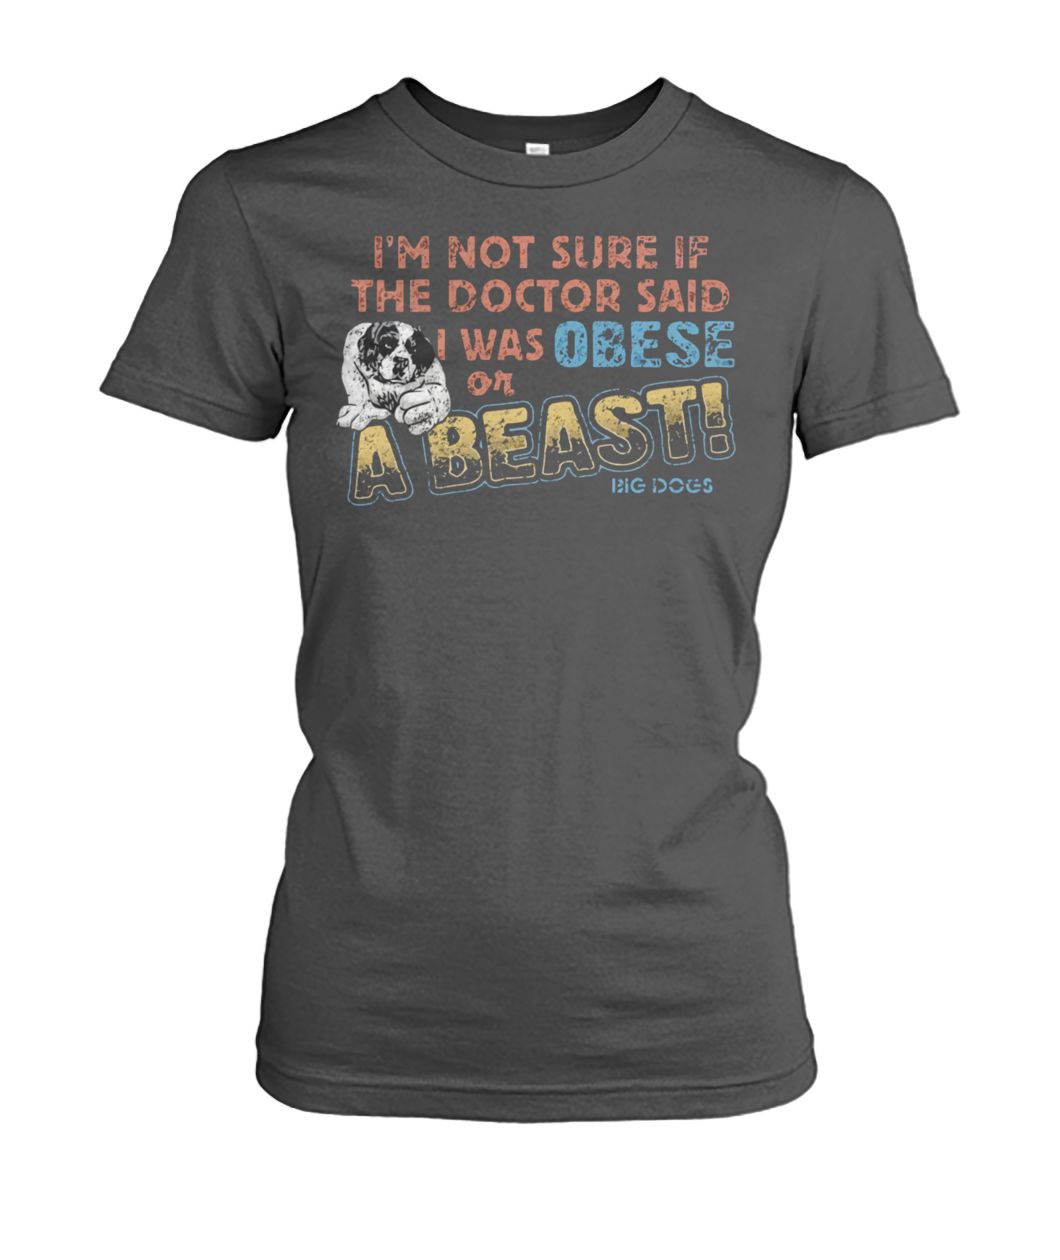 I’m not sure if the doctor said I was obese or a beast big dogs women's crew tee